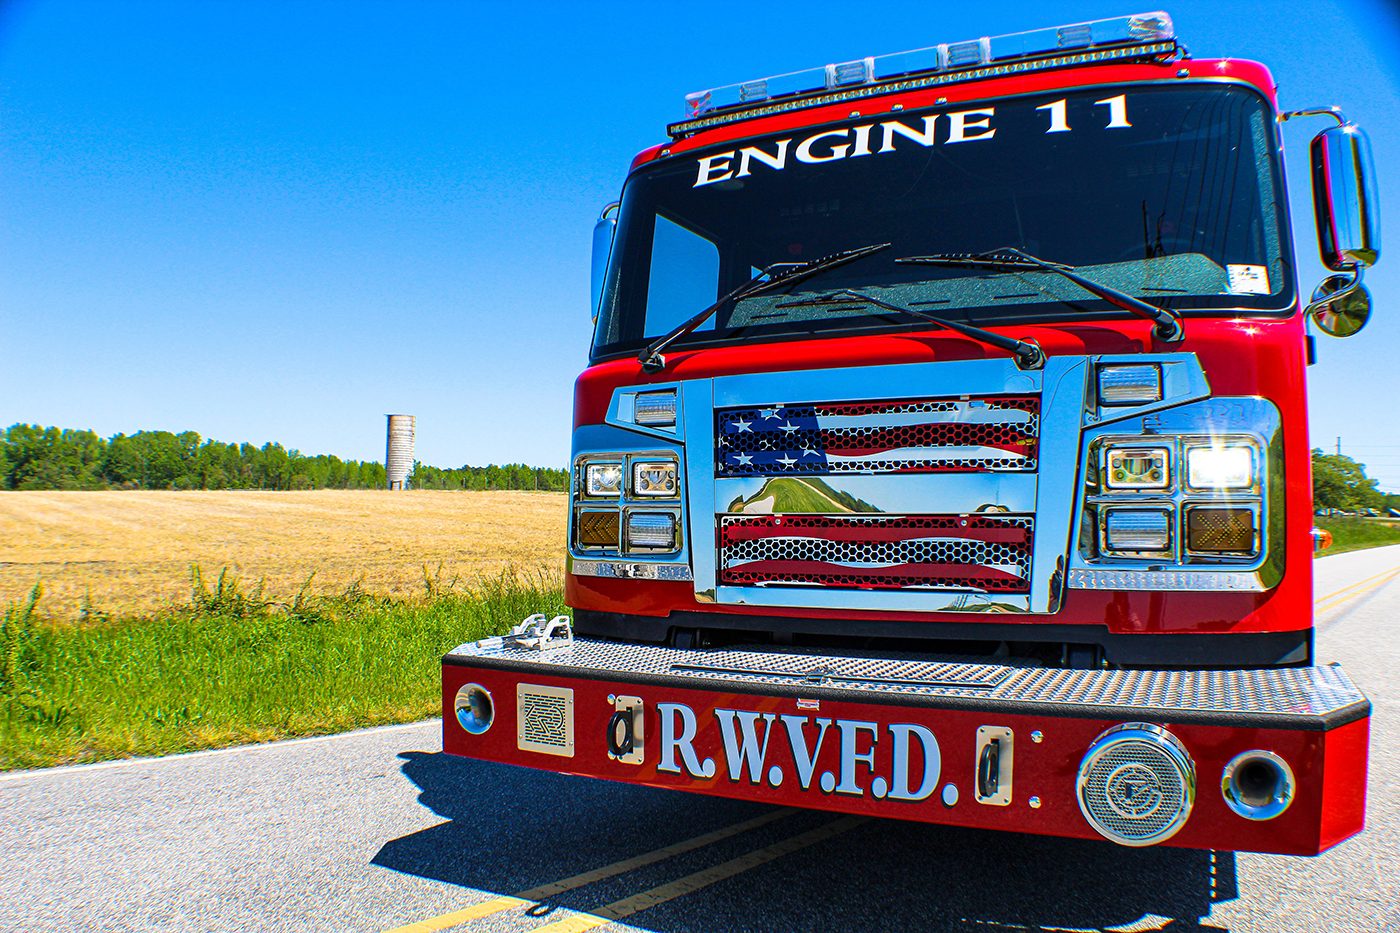 Image of the front of RWVFD's truck